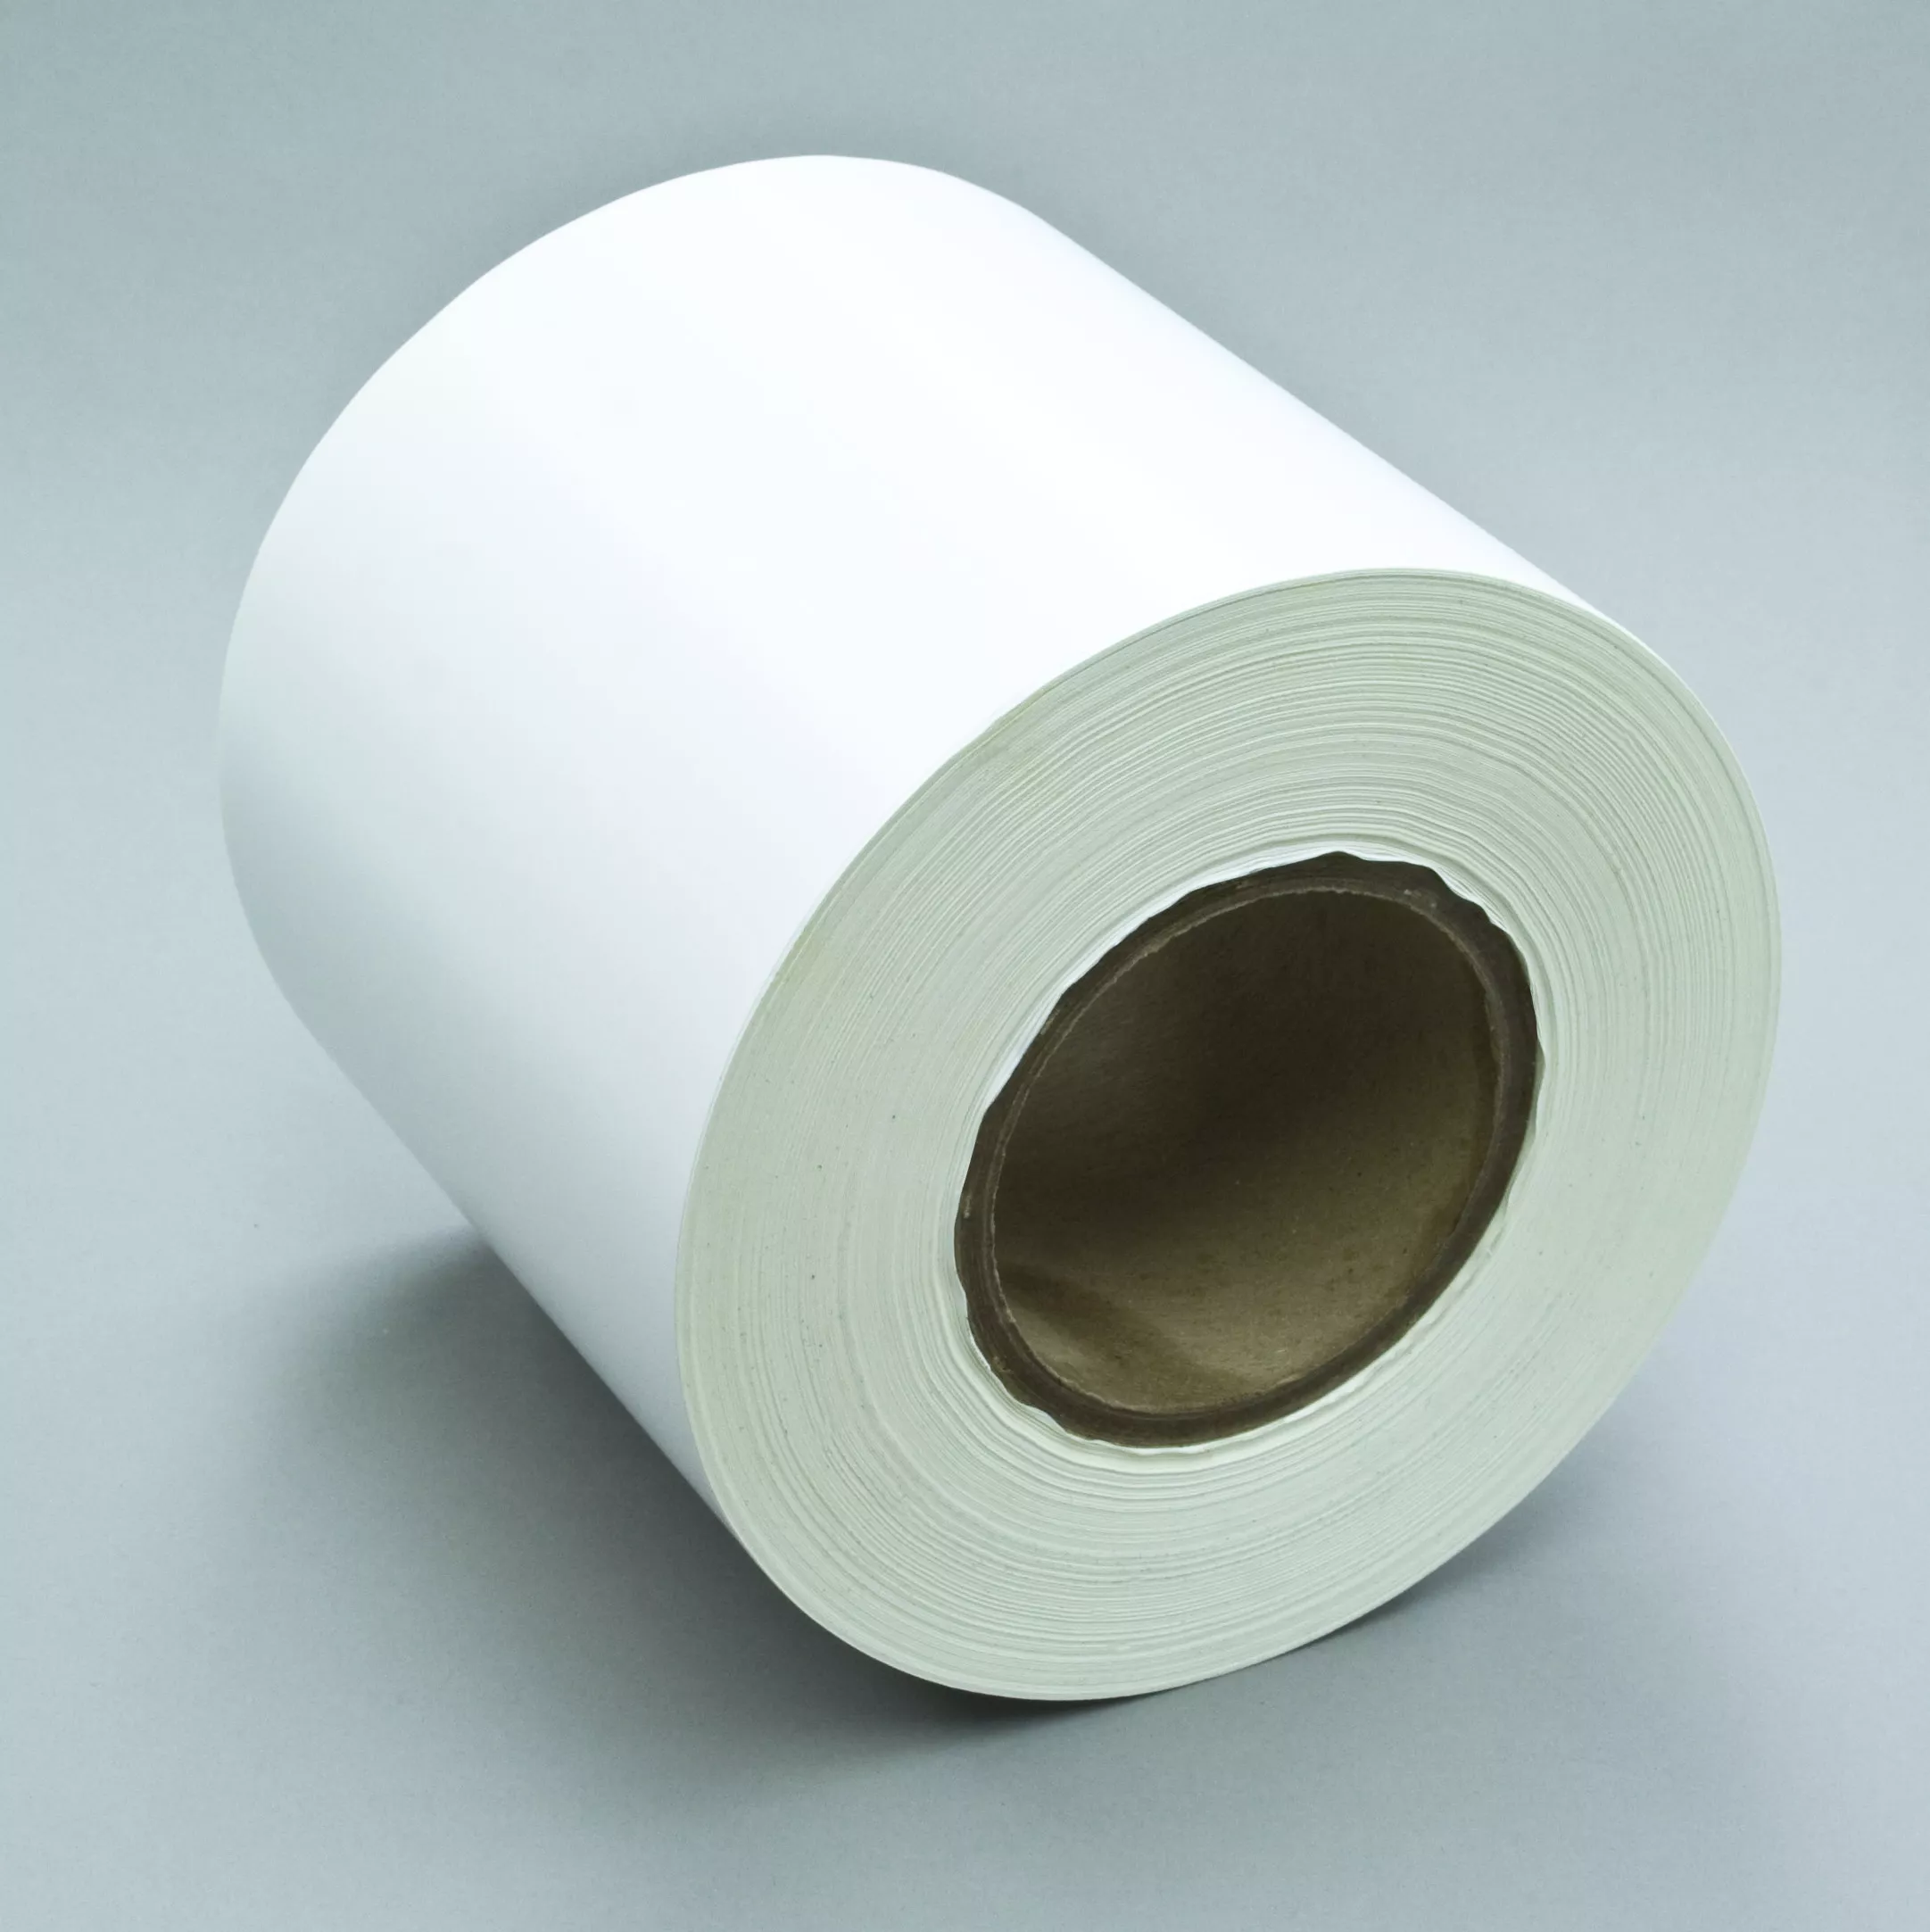 3M™ Sheet and Screen Label Material 7045, White Vinyl, 20 in x 27 in,
100 Sheets/Case